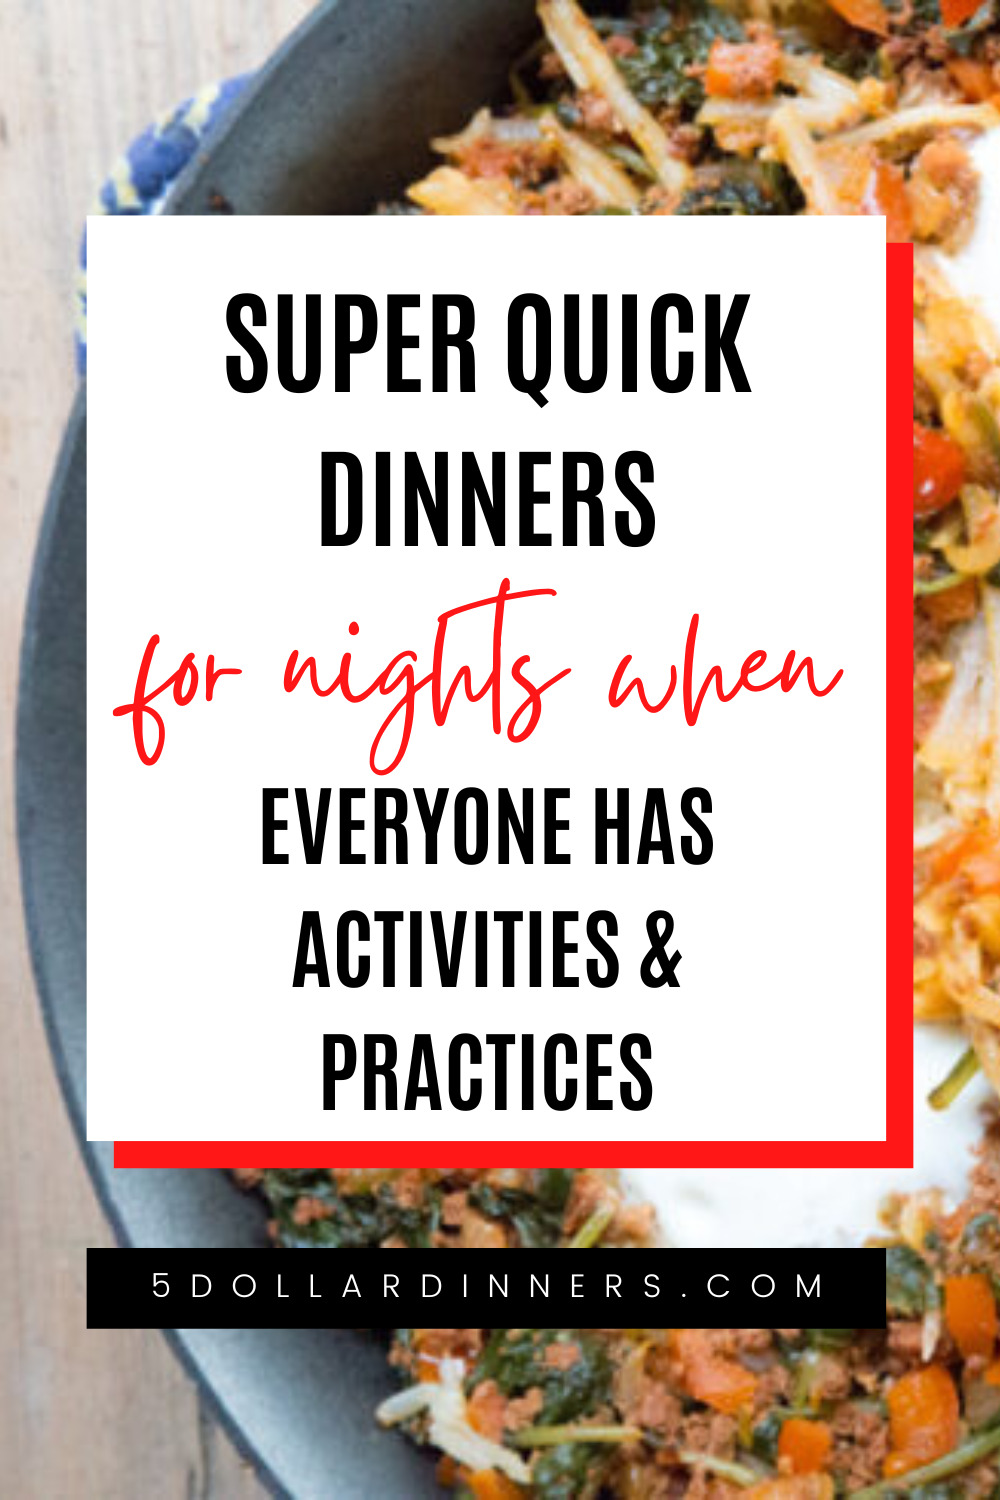 super quick dinners for busy nights